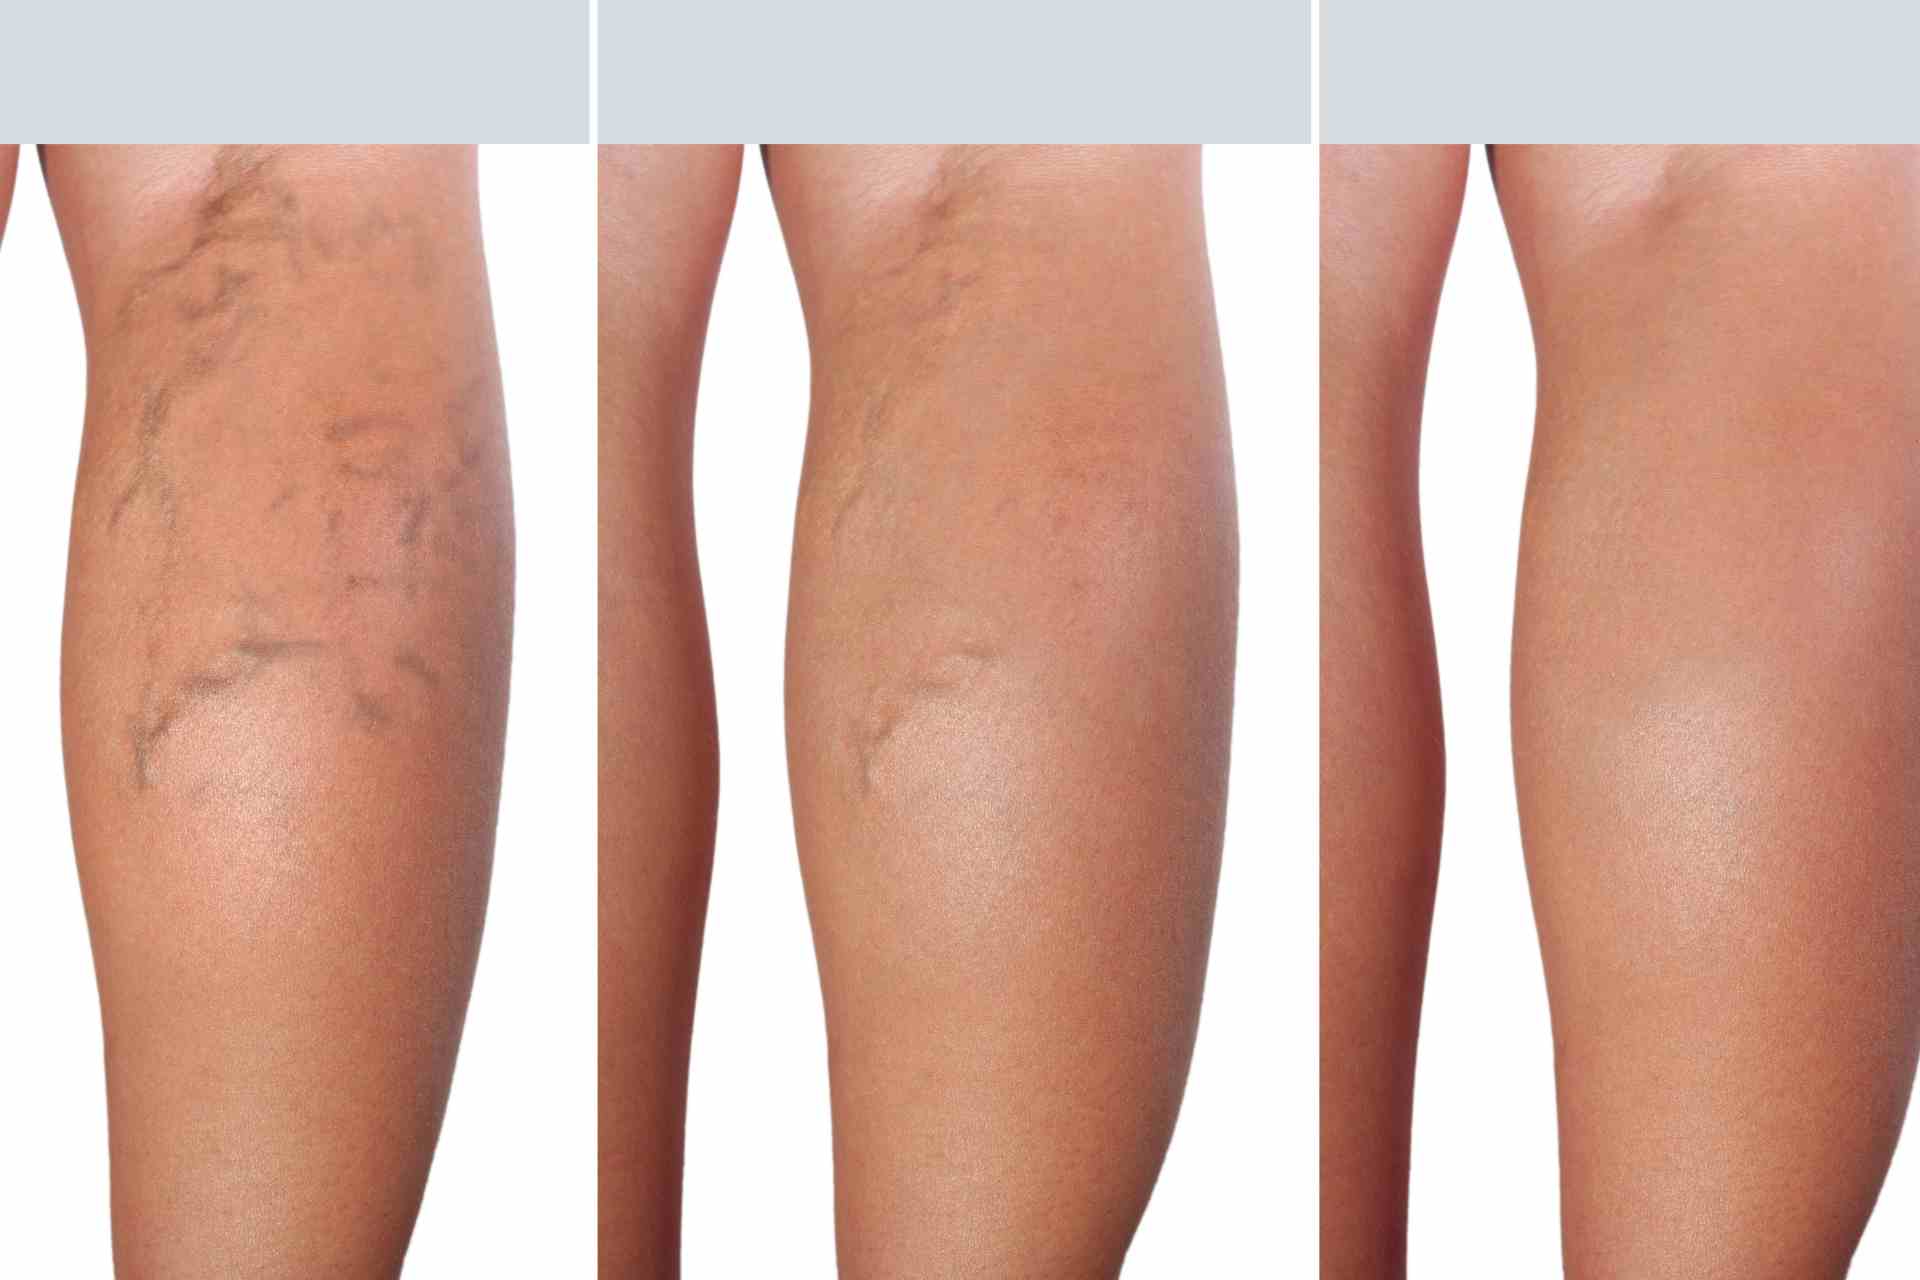 can varicose veins disappear with exercise